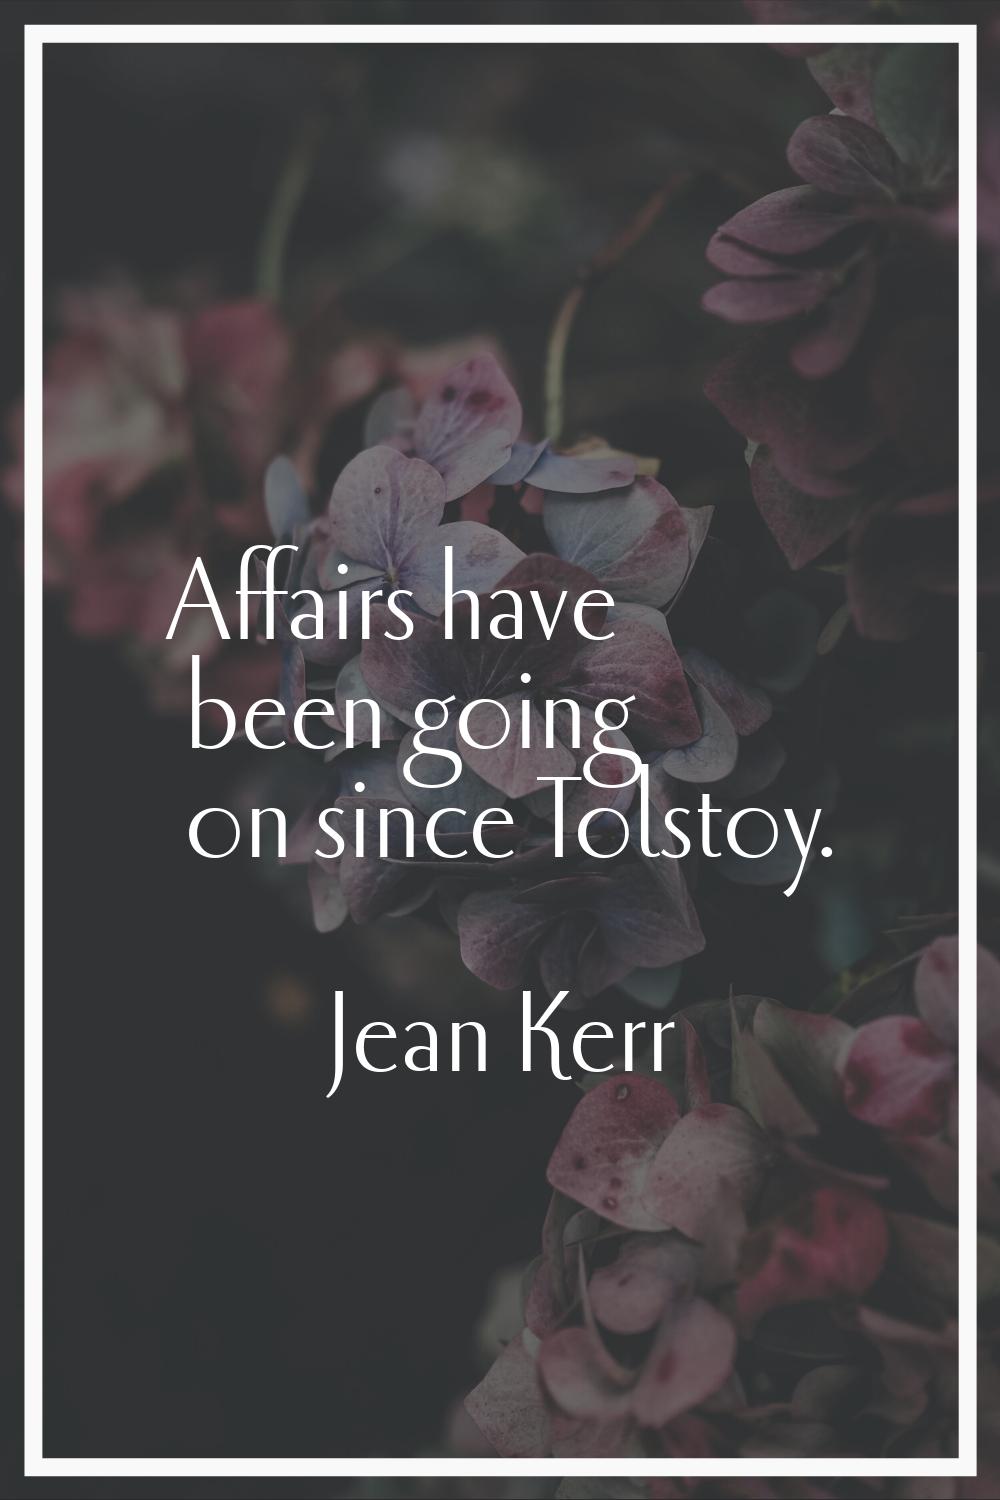 Affairs have been going on since Tolstoy.